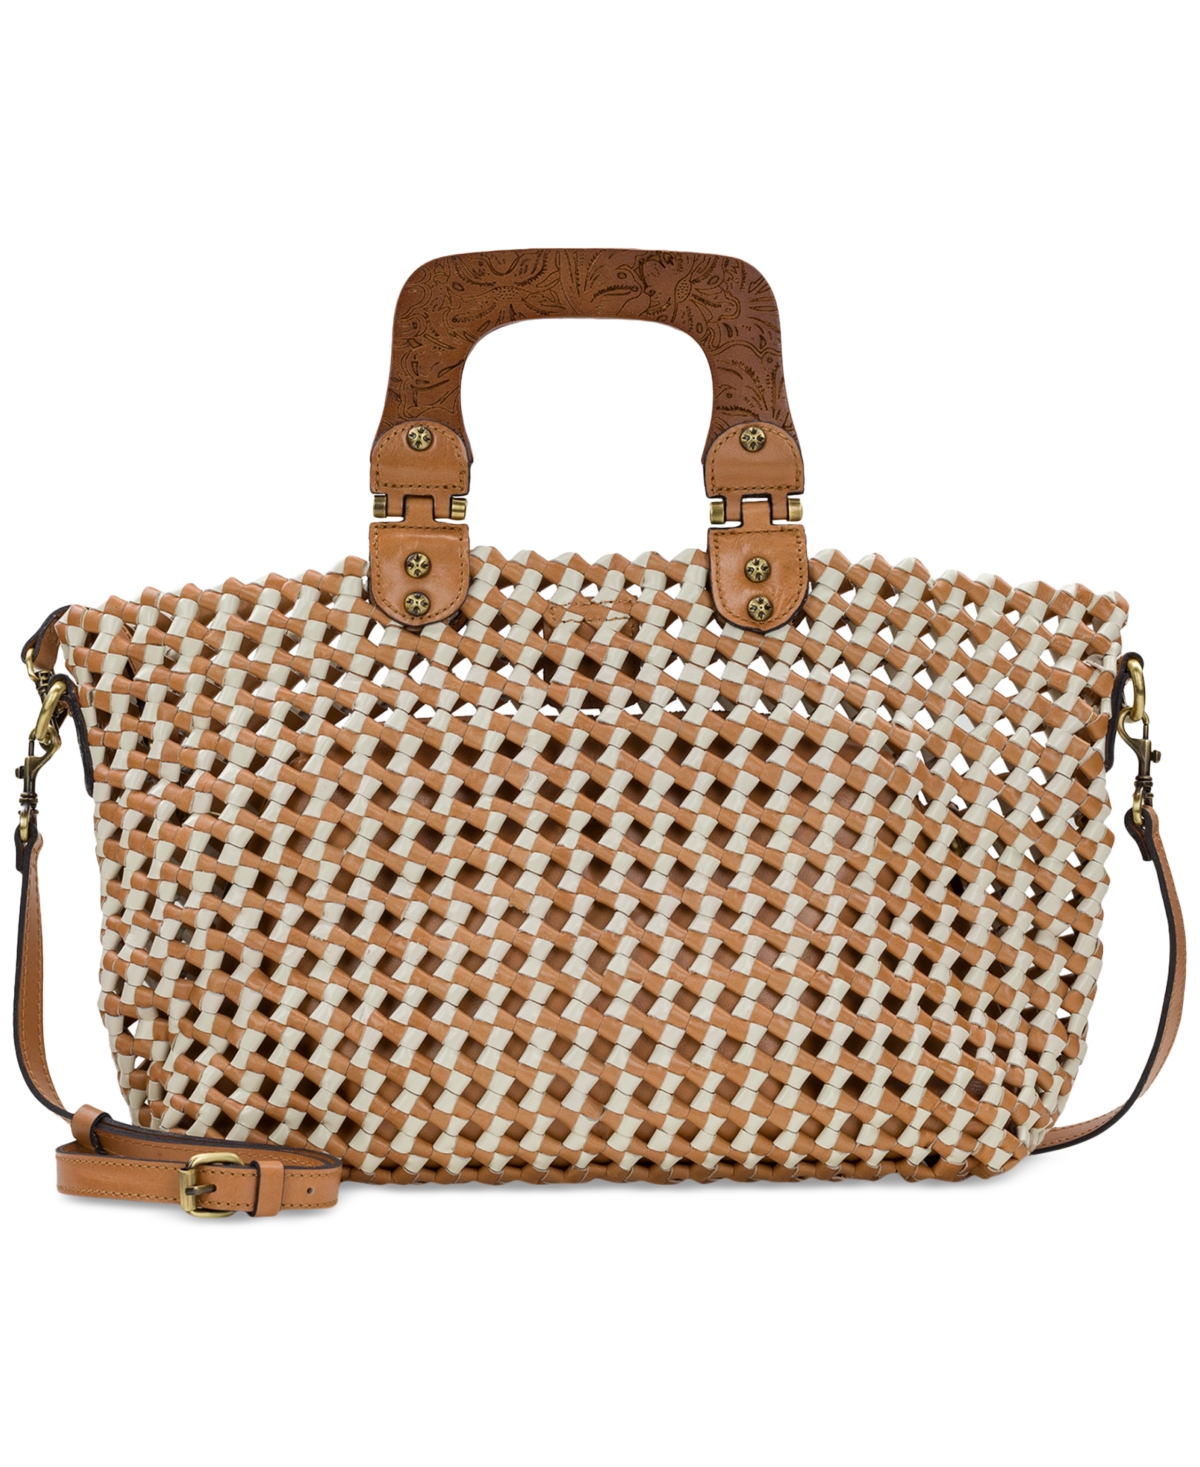 Lorina Woven Leather Large Tote with Pouch - Naturale /